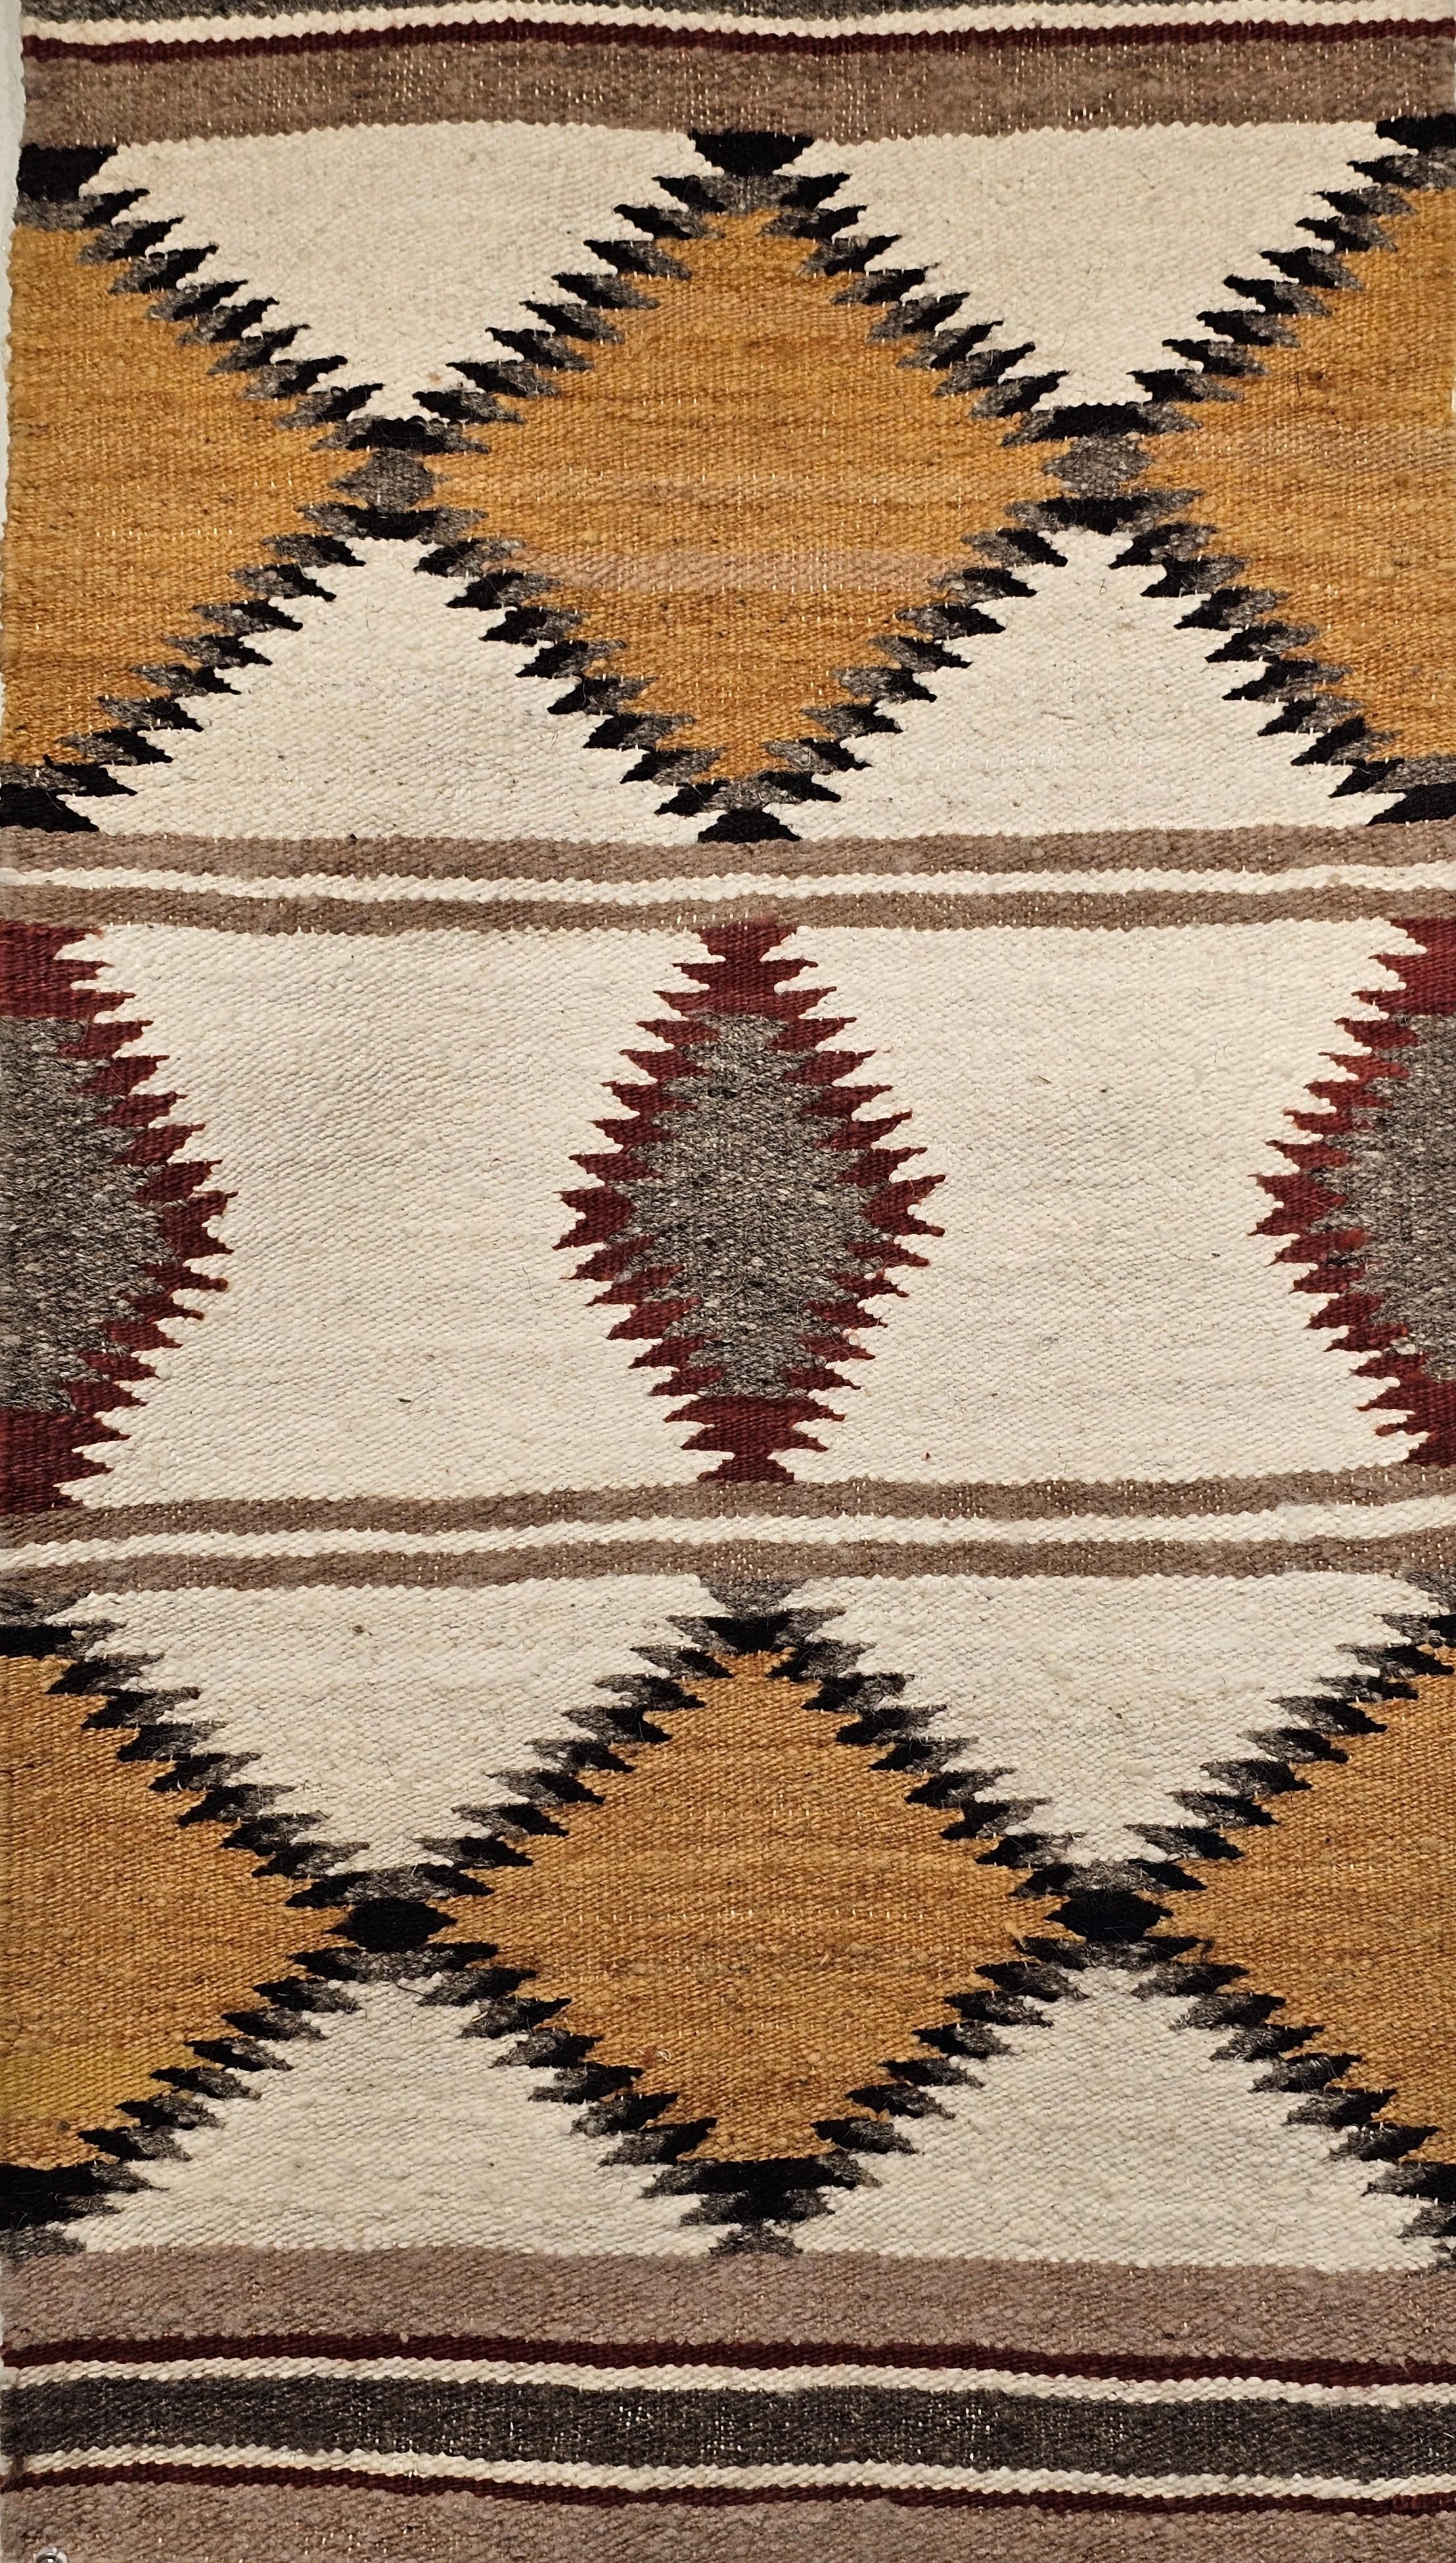 Vintage Native American Navajo area rug in ivory, gray, brown, and black colors from the late 20th century.   The rug has a very fine weave and beautiful design.   Navajo rugs are generally flat woven with wool for the body of the rug and usually